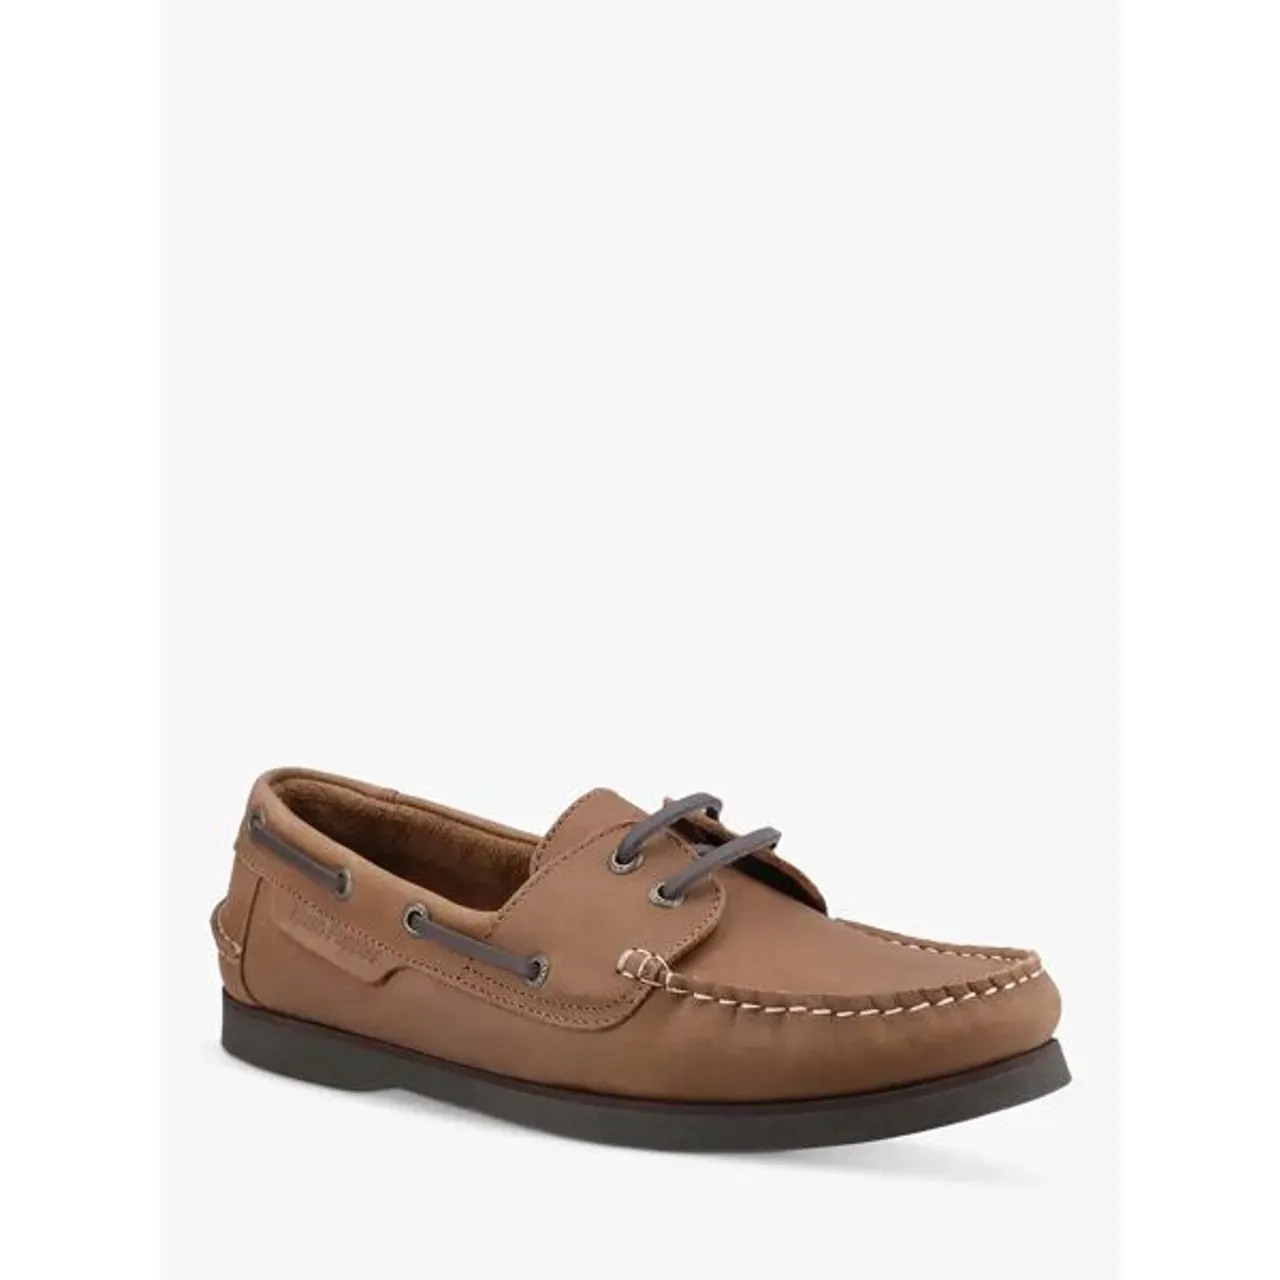 Hush Puppies Henry Leather Boat Shoes - Tan - Male